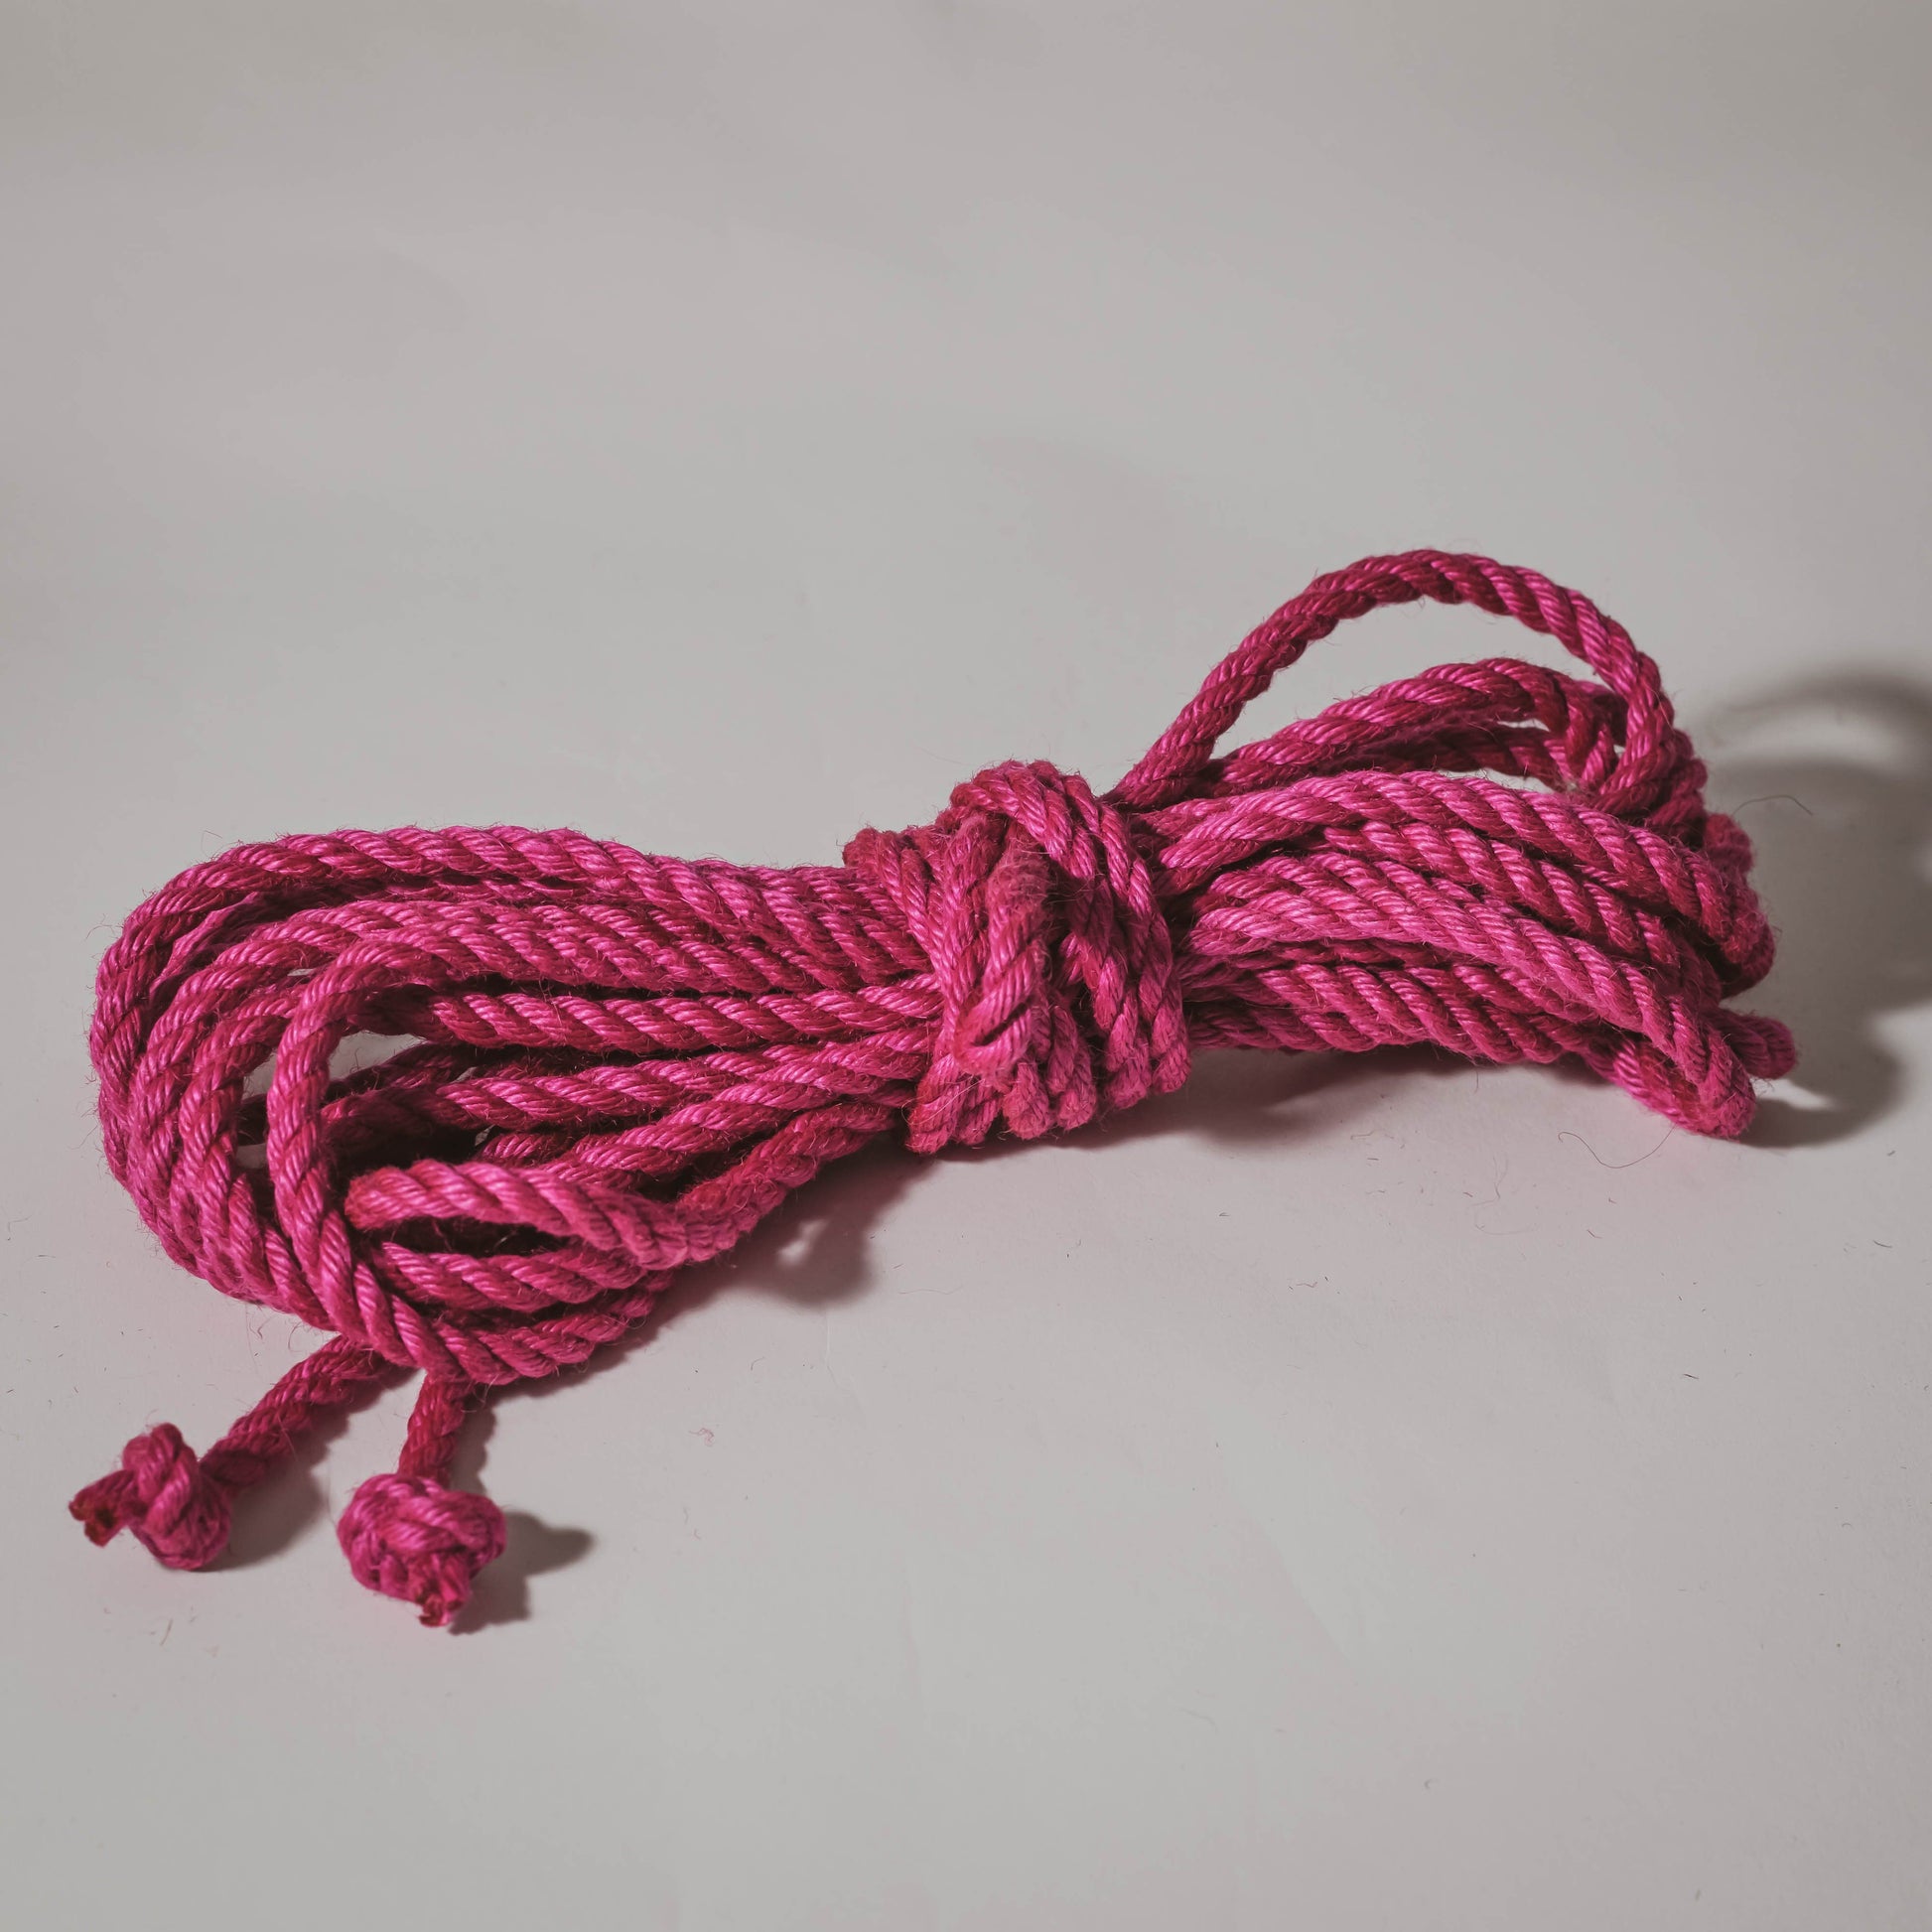 Jute Shibari Rope 300 feet - Conditioned and ready to use